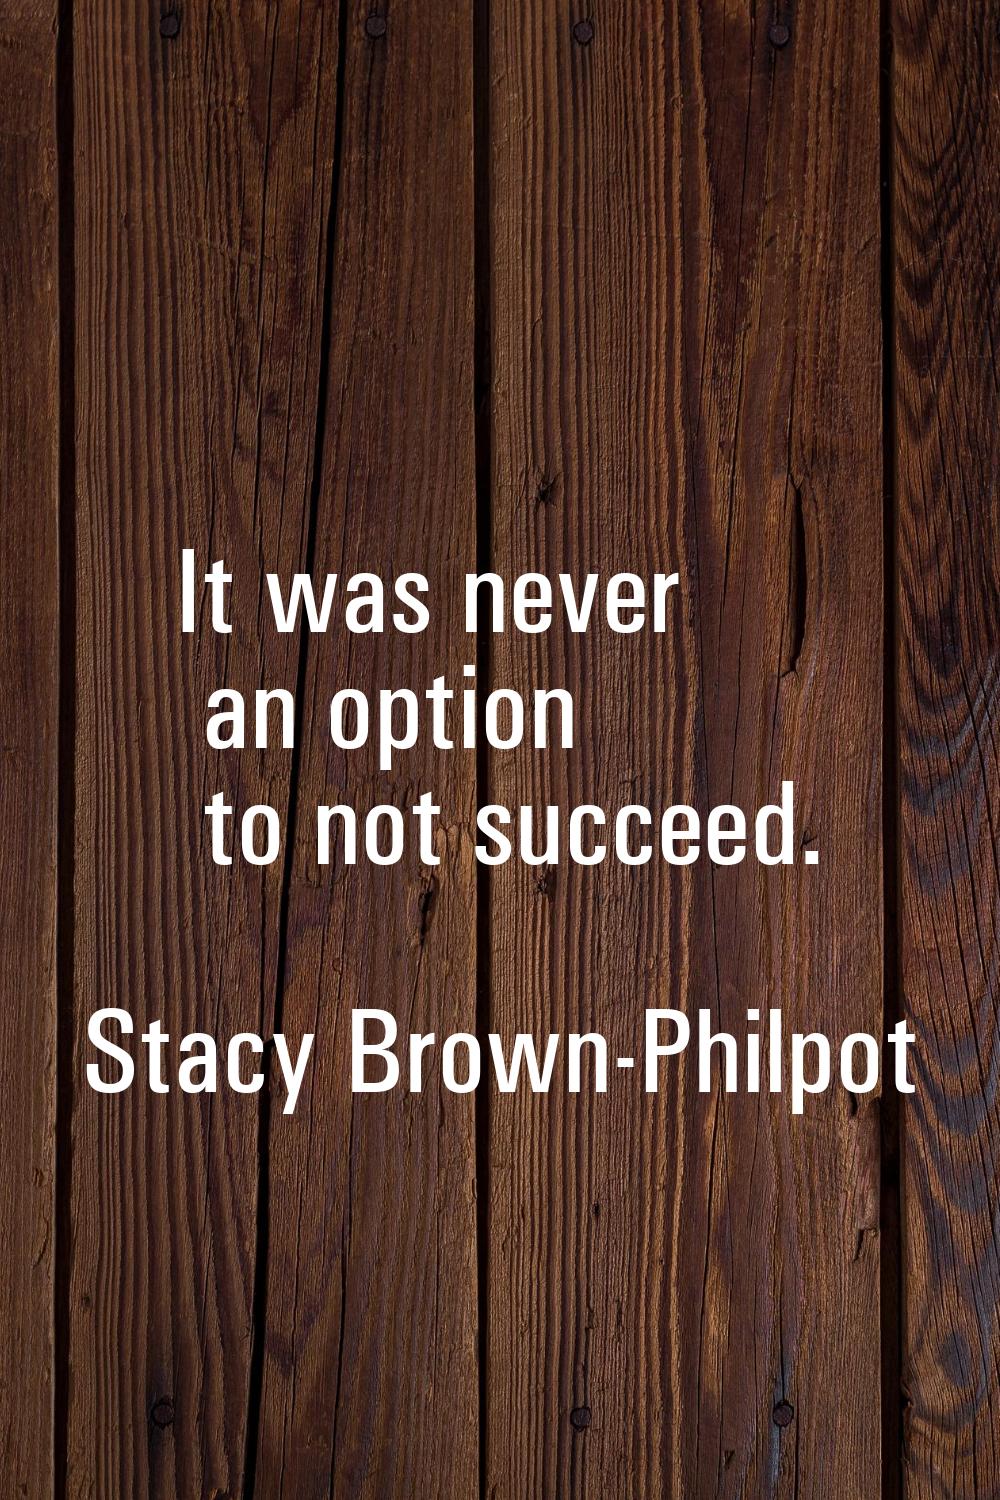 It was never an option to not succeed.